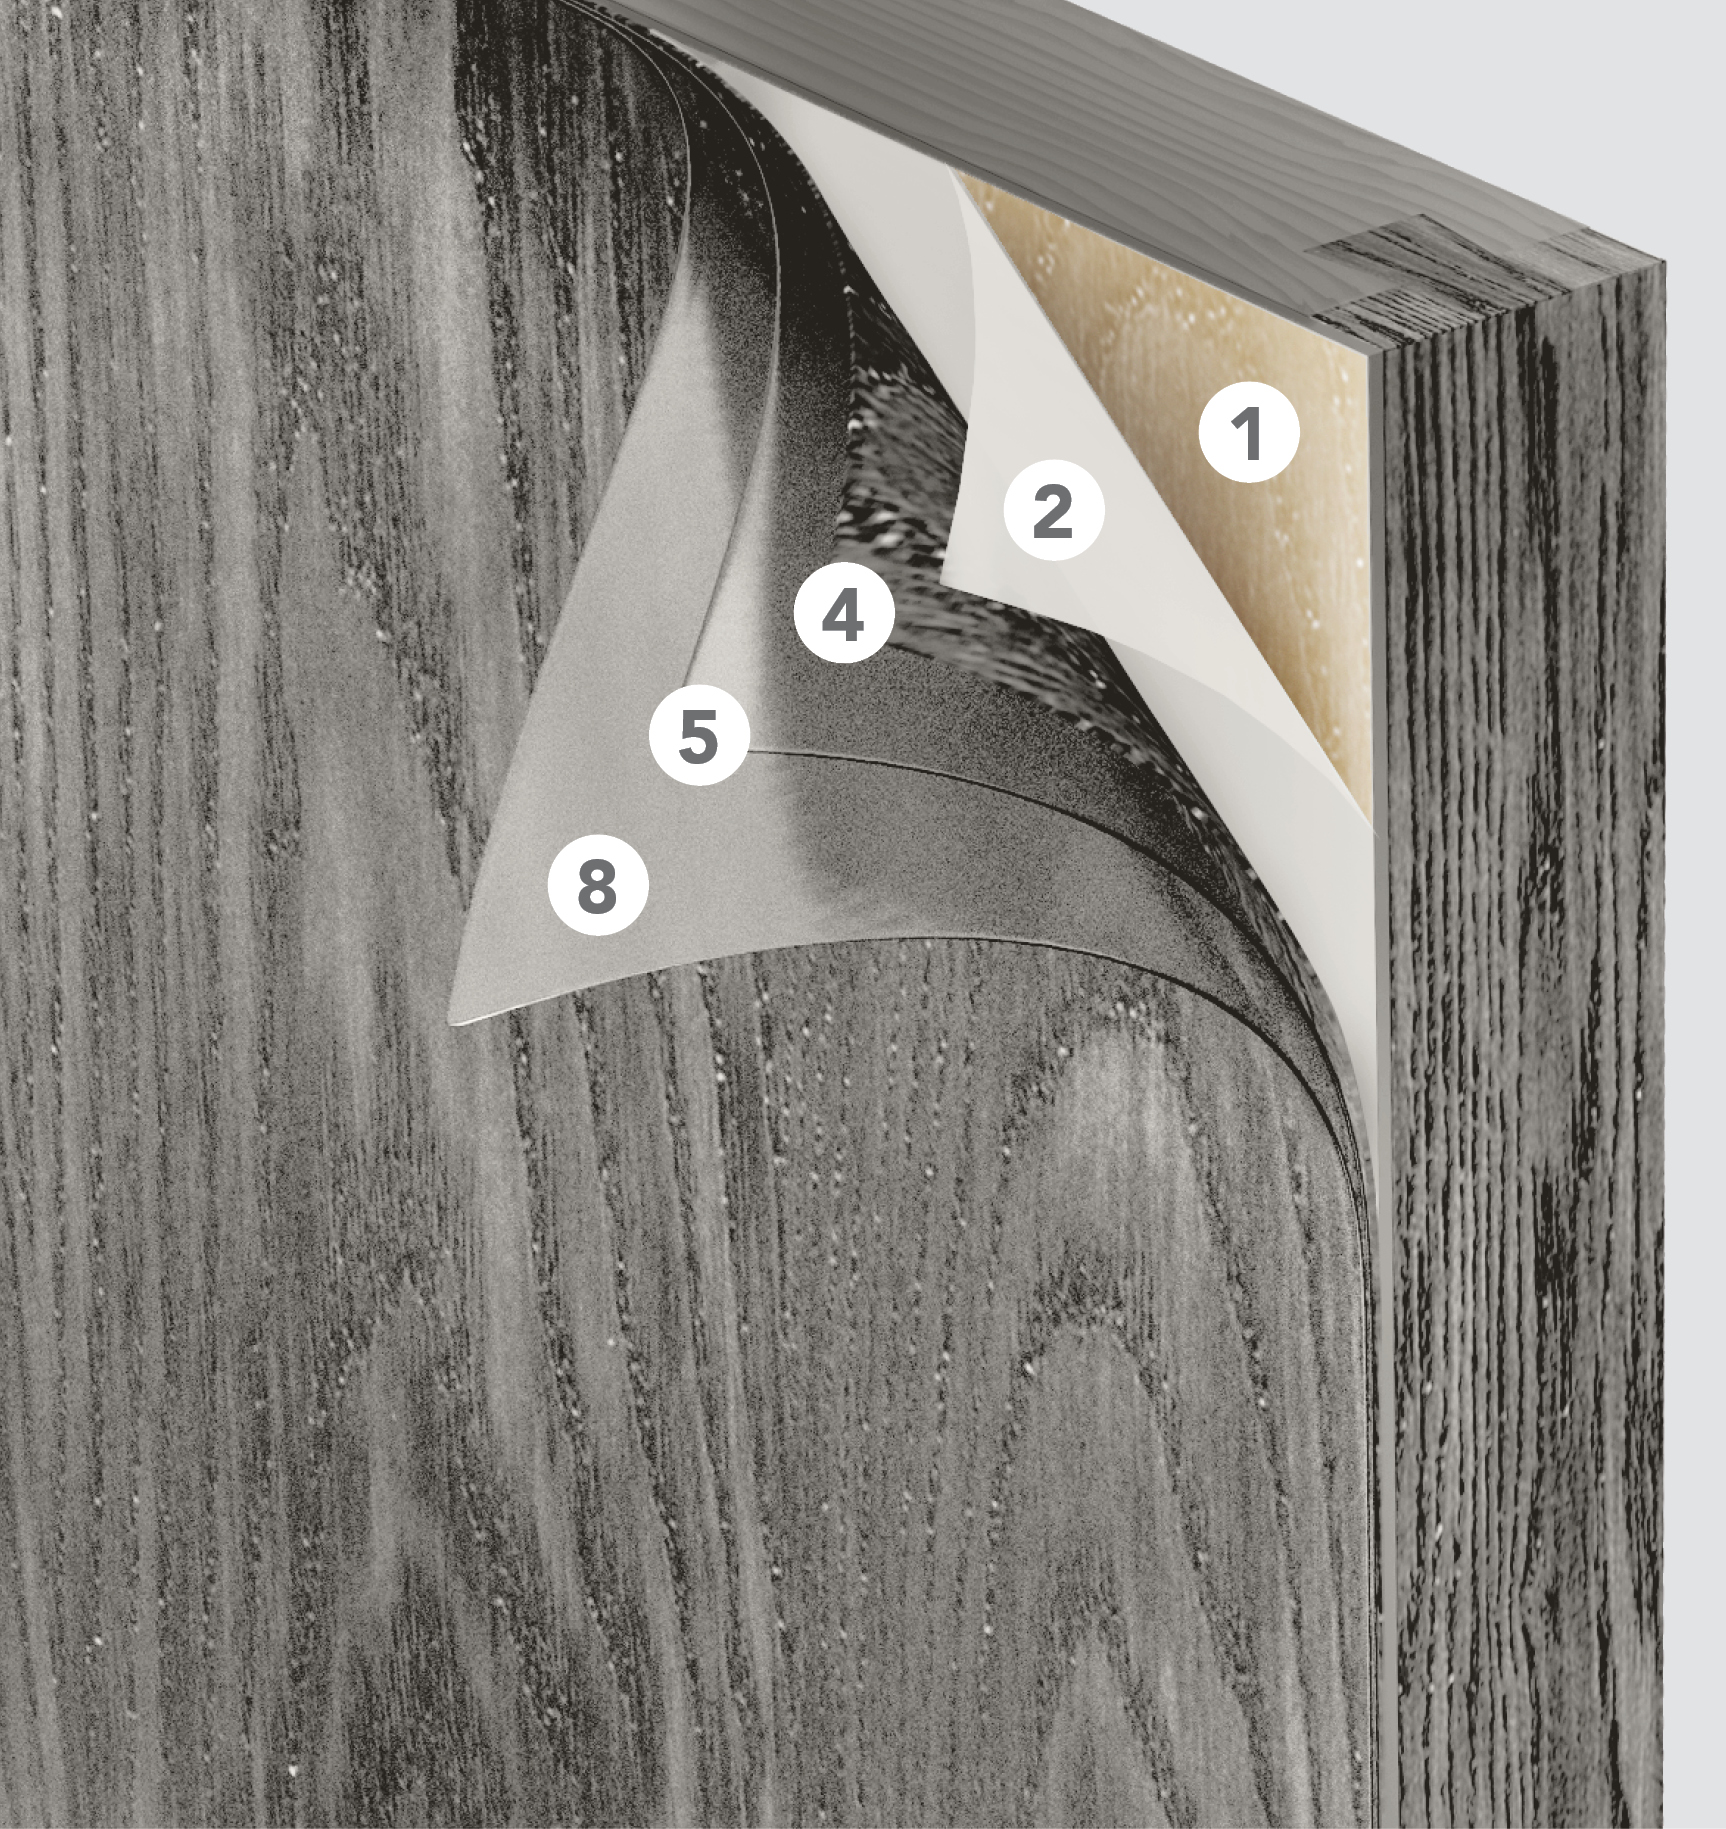 Image showing breakaway layers of a ProVia Signet fiberglass door illustrating the phases of the glazing process for door colors